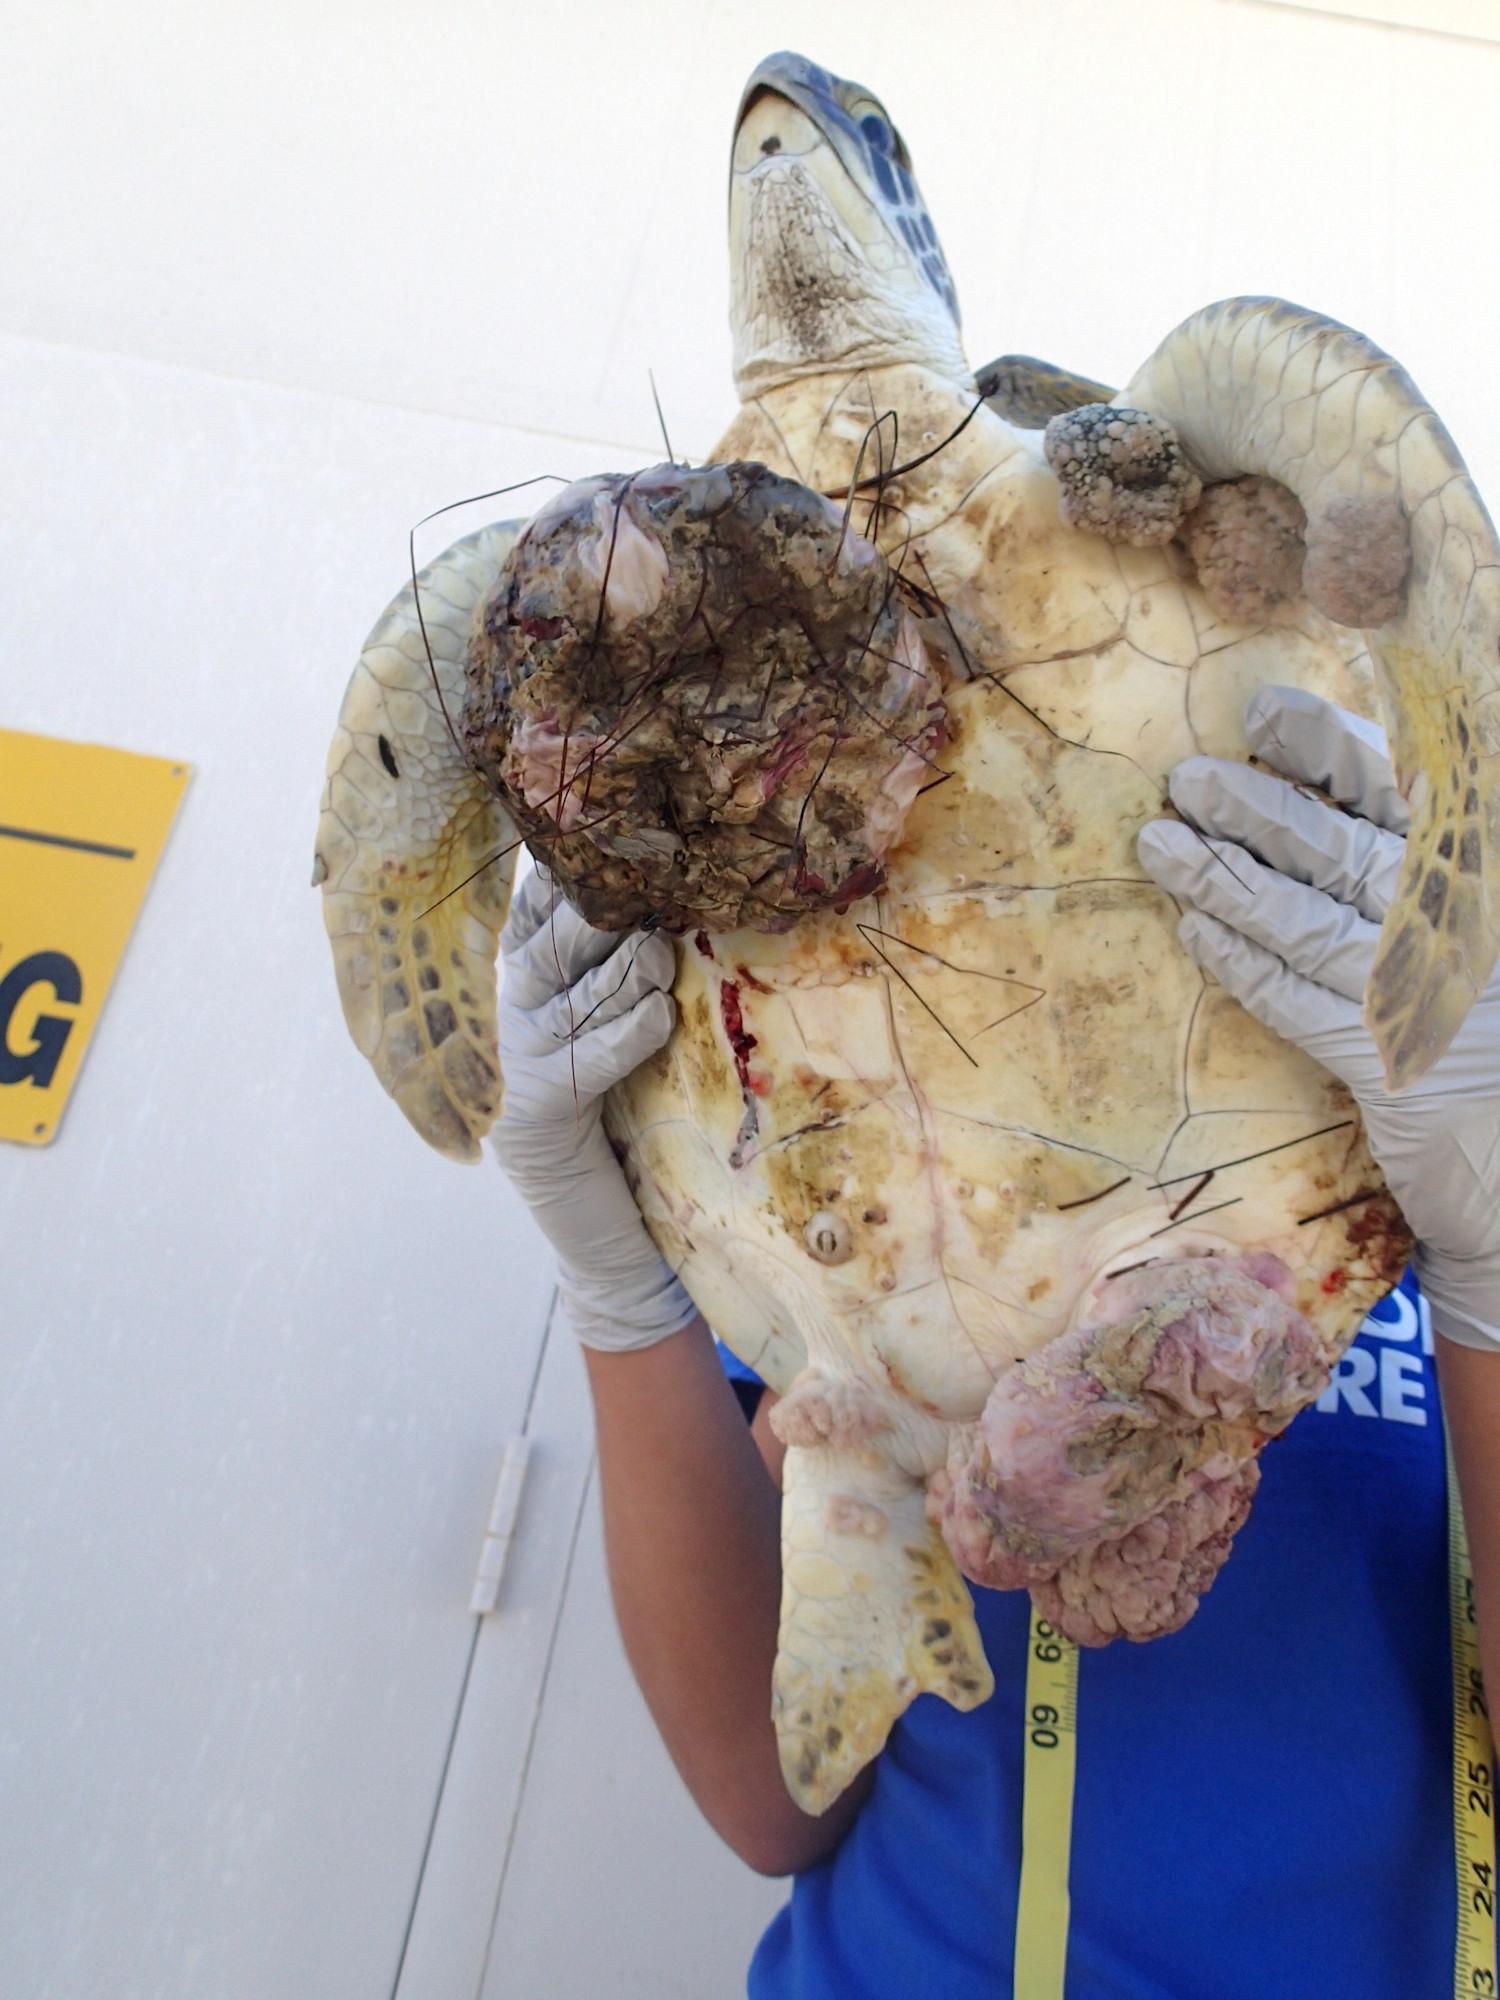 A sea turtle with Fibropapillomatosis, a herpes-like disease that causes large tumors/NPS